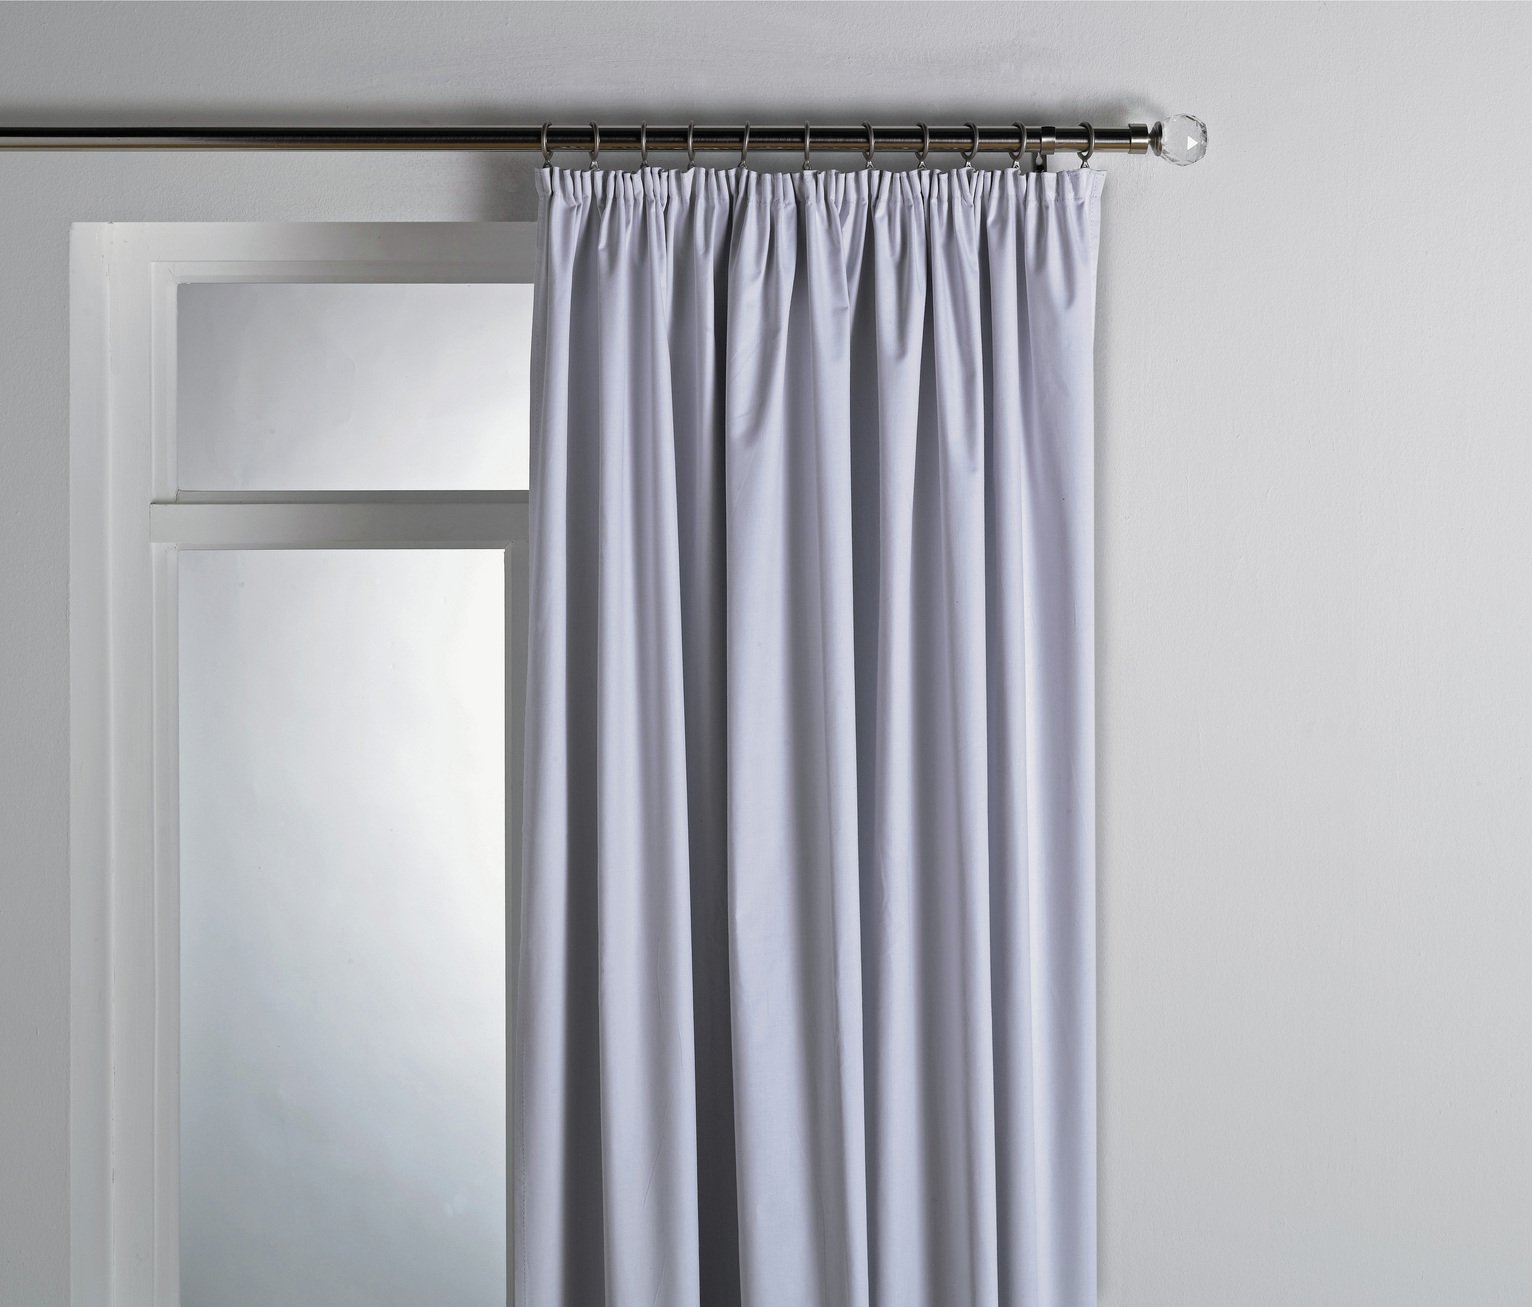 Argos Home Pleat Top Blackout Curtain Lining 168x178cm White review